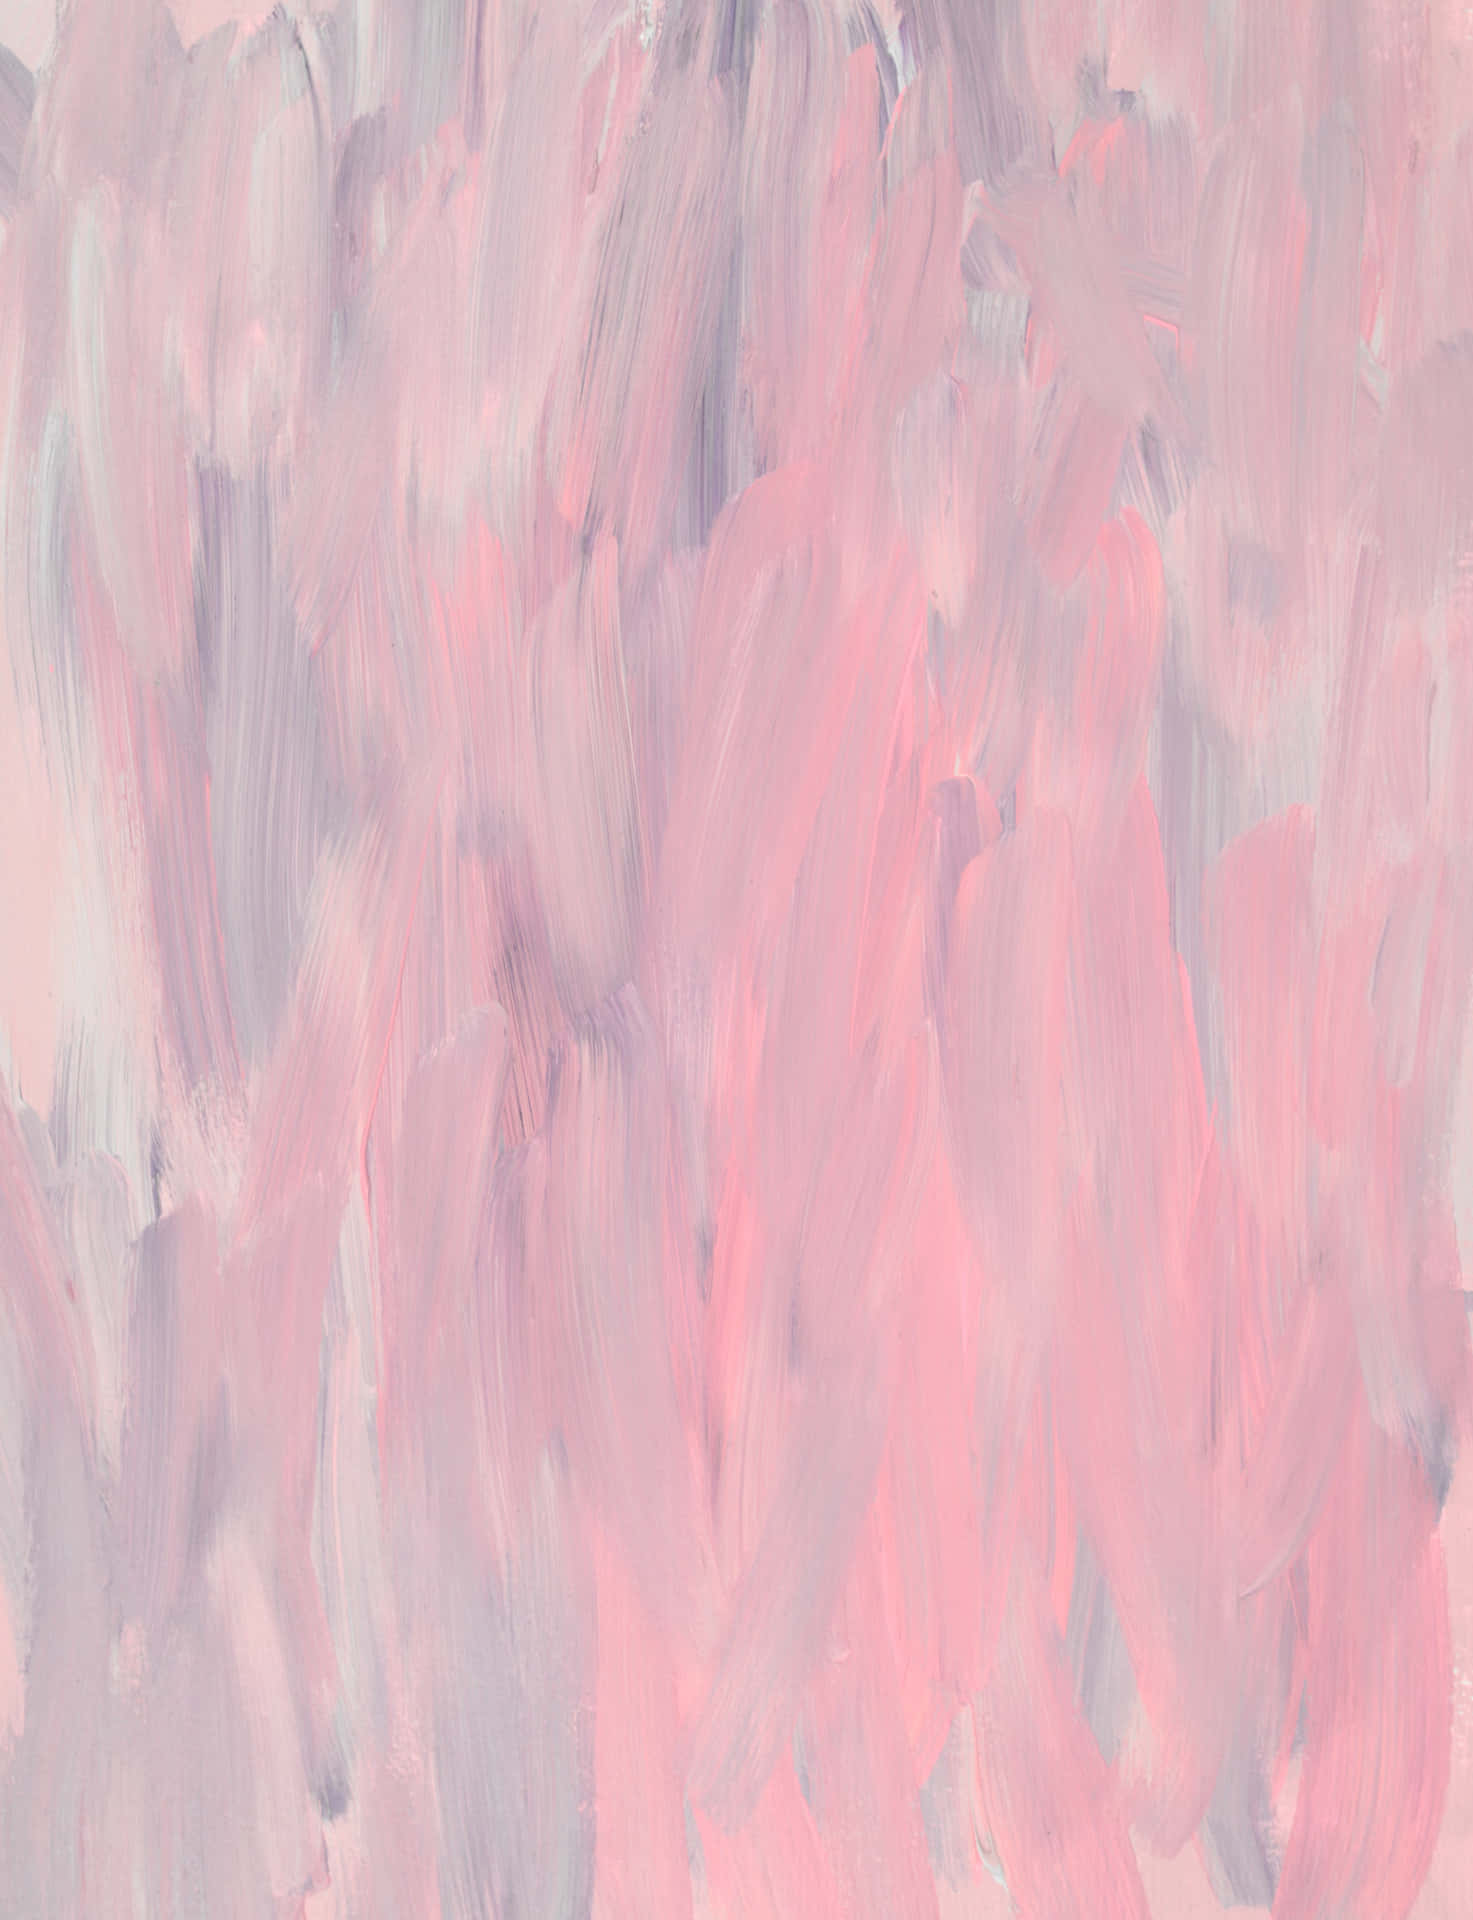 A Painting Of Pink And Grey Paint